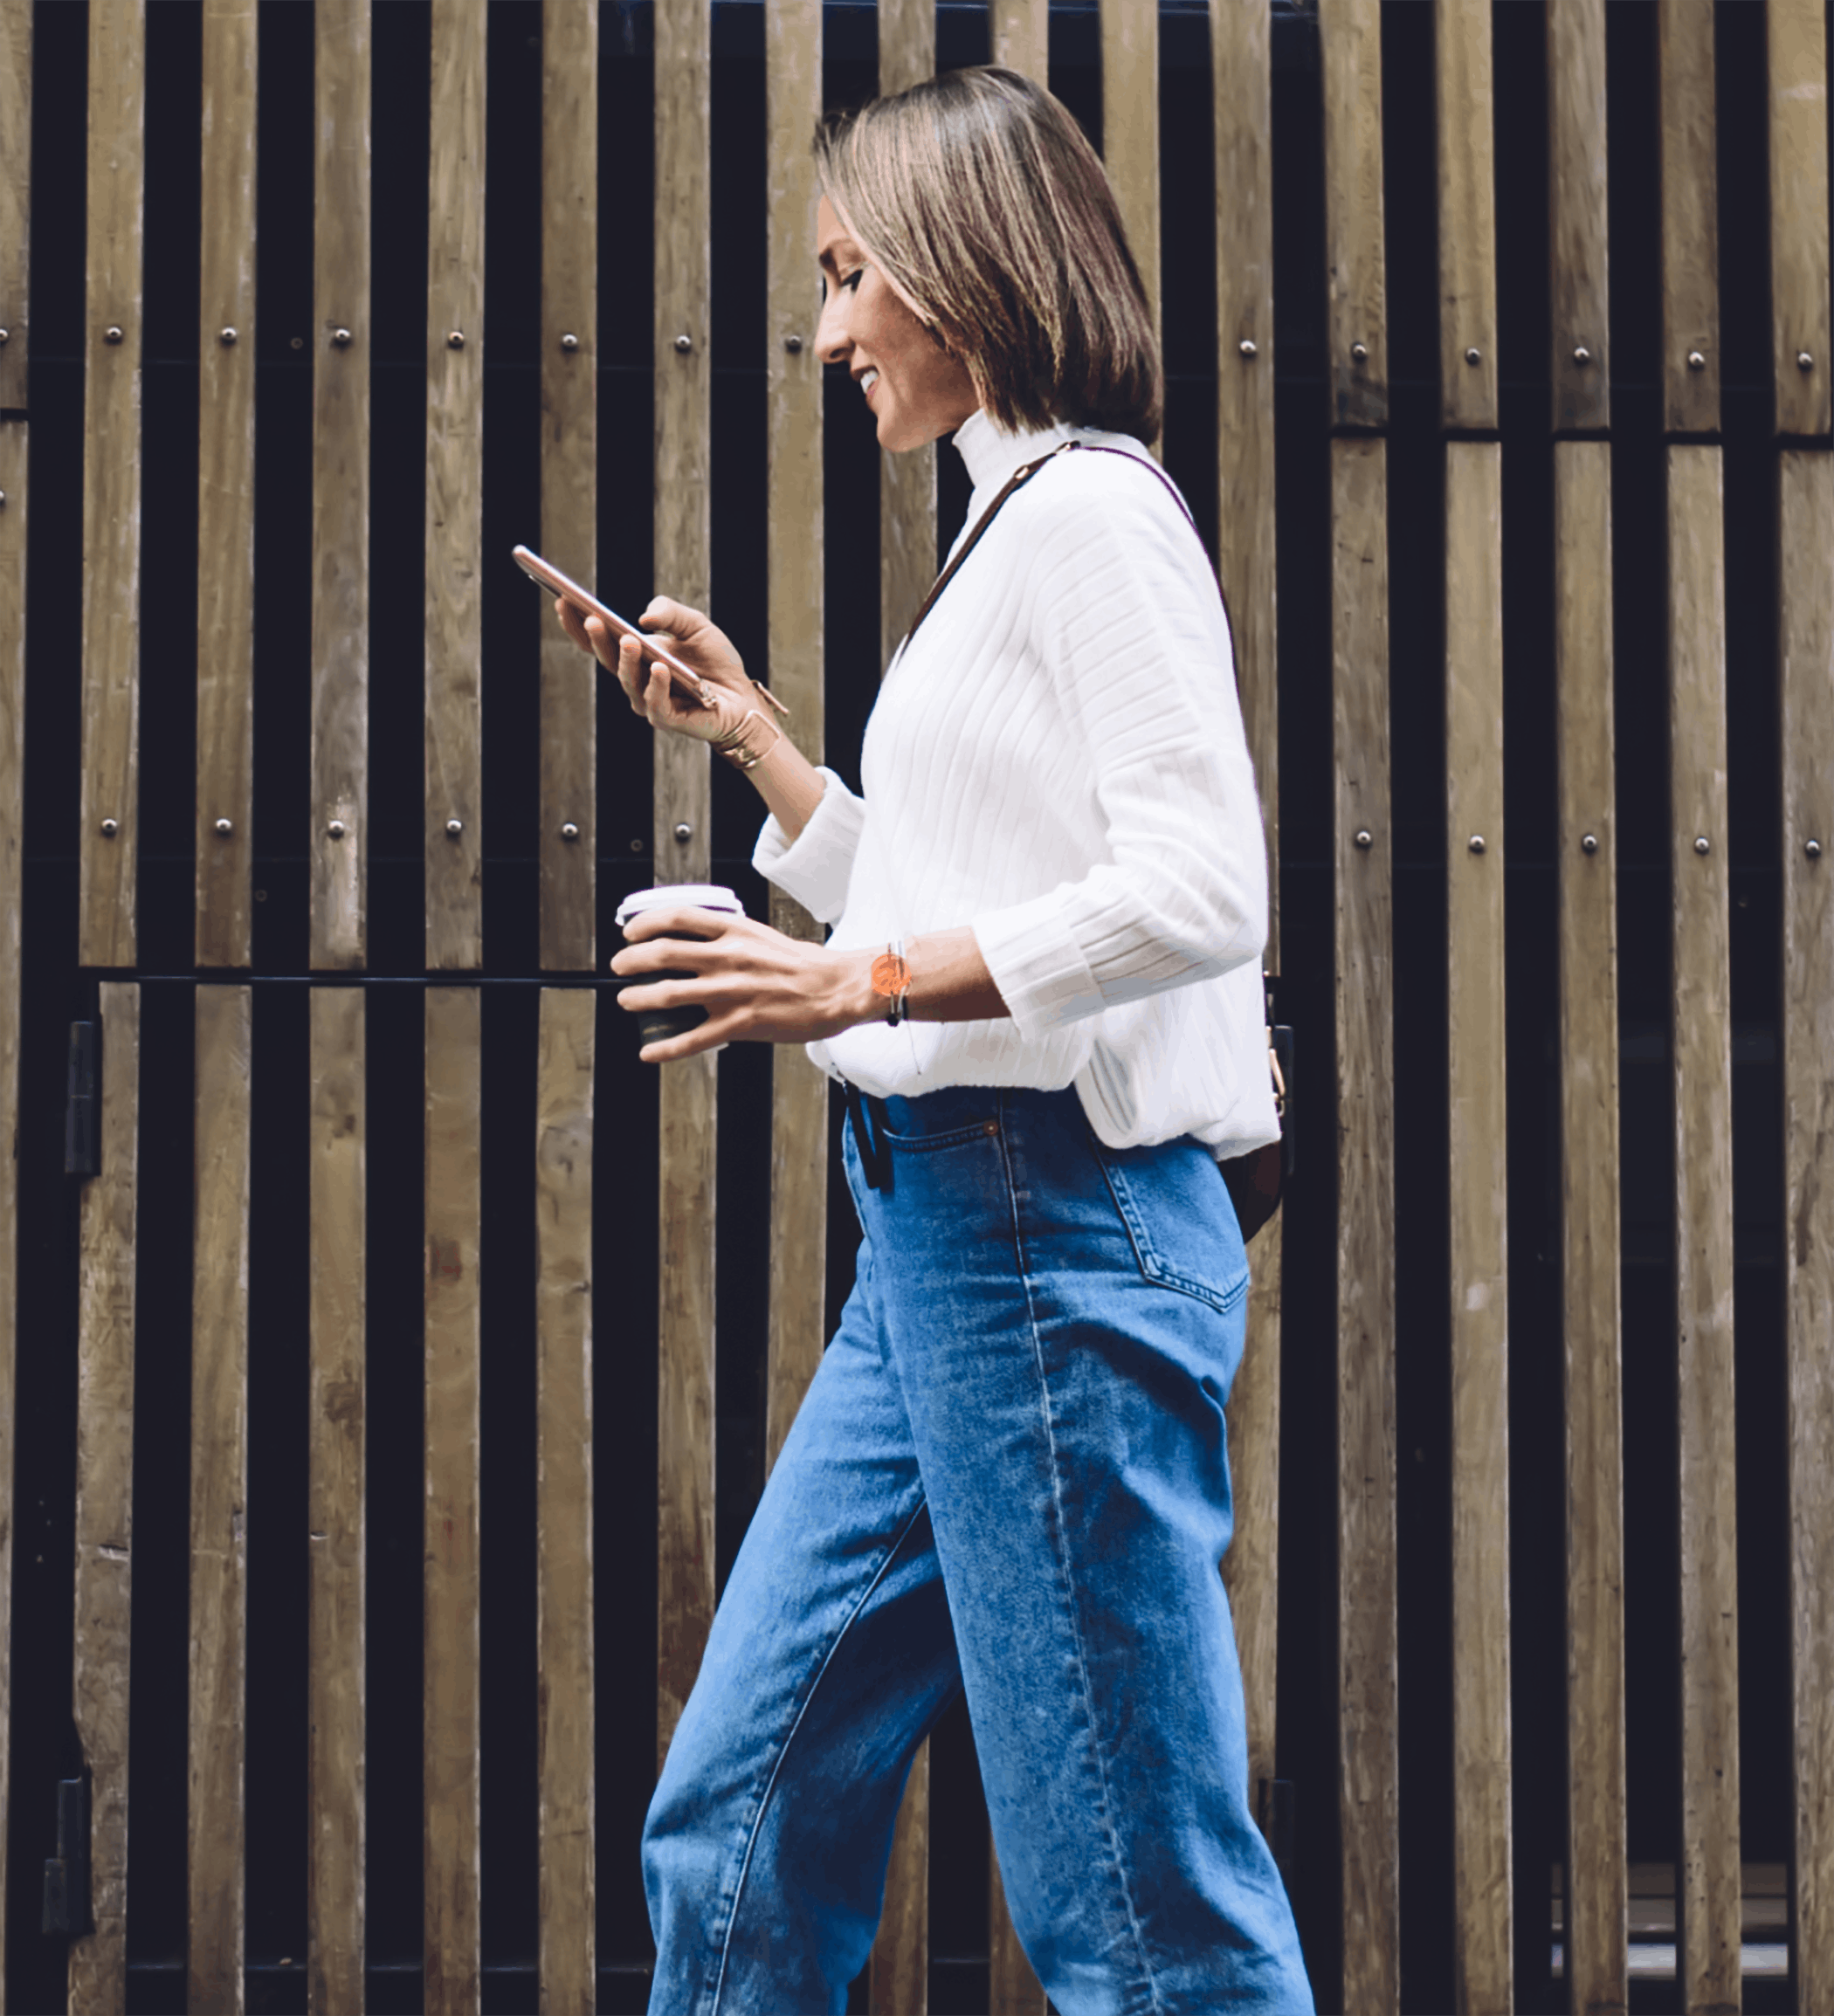 woman walking and texting outside